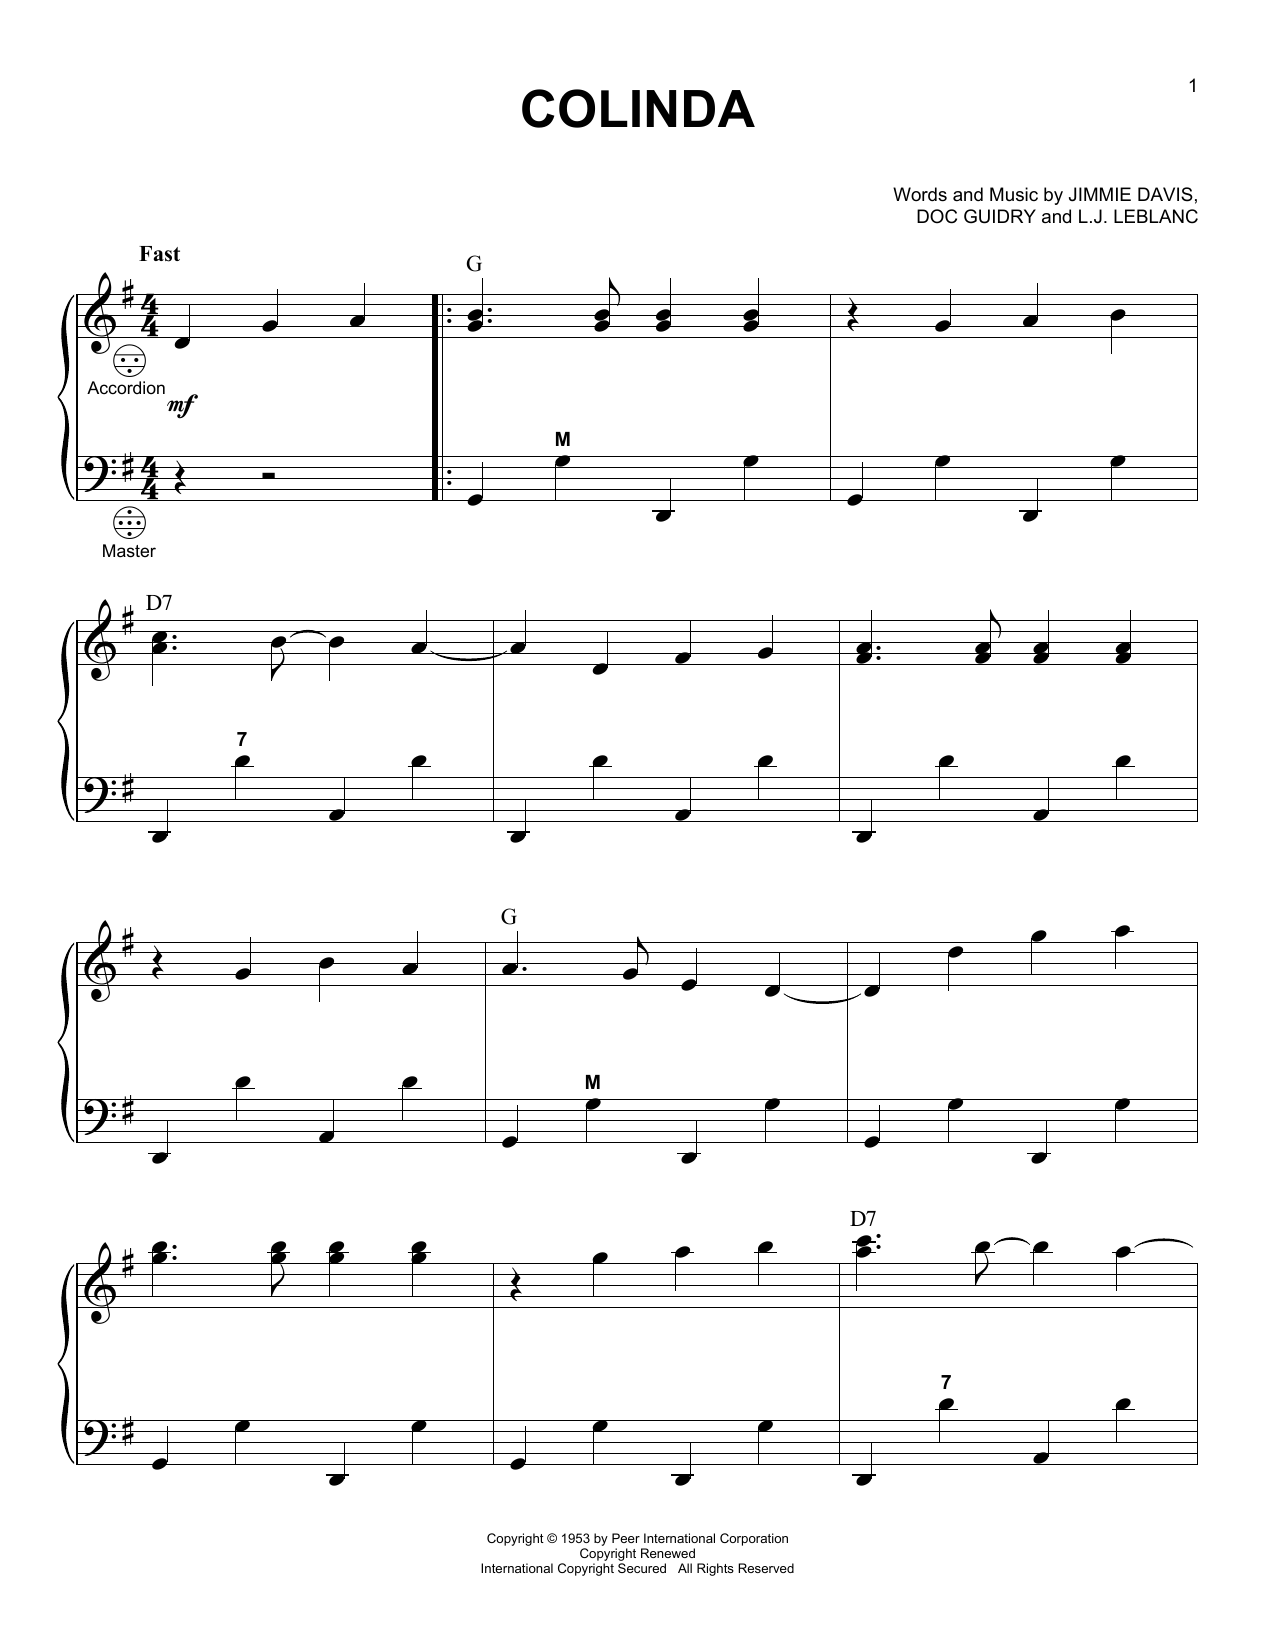 Doc Guidry Colinda sheet music notes and chords. Download Printable PDF.